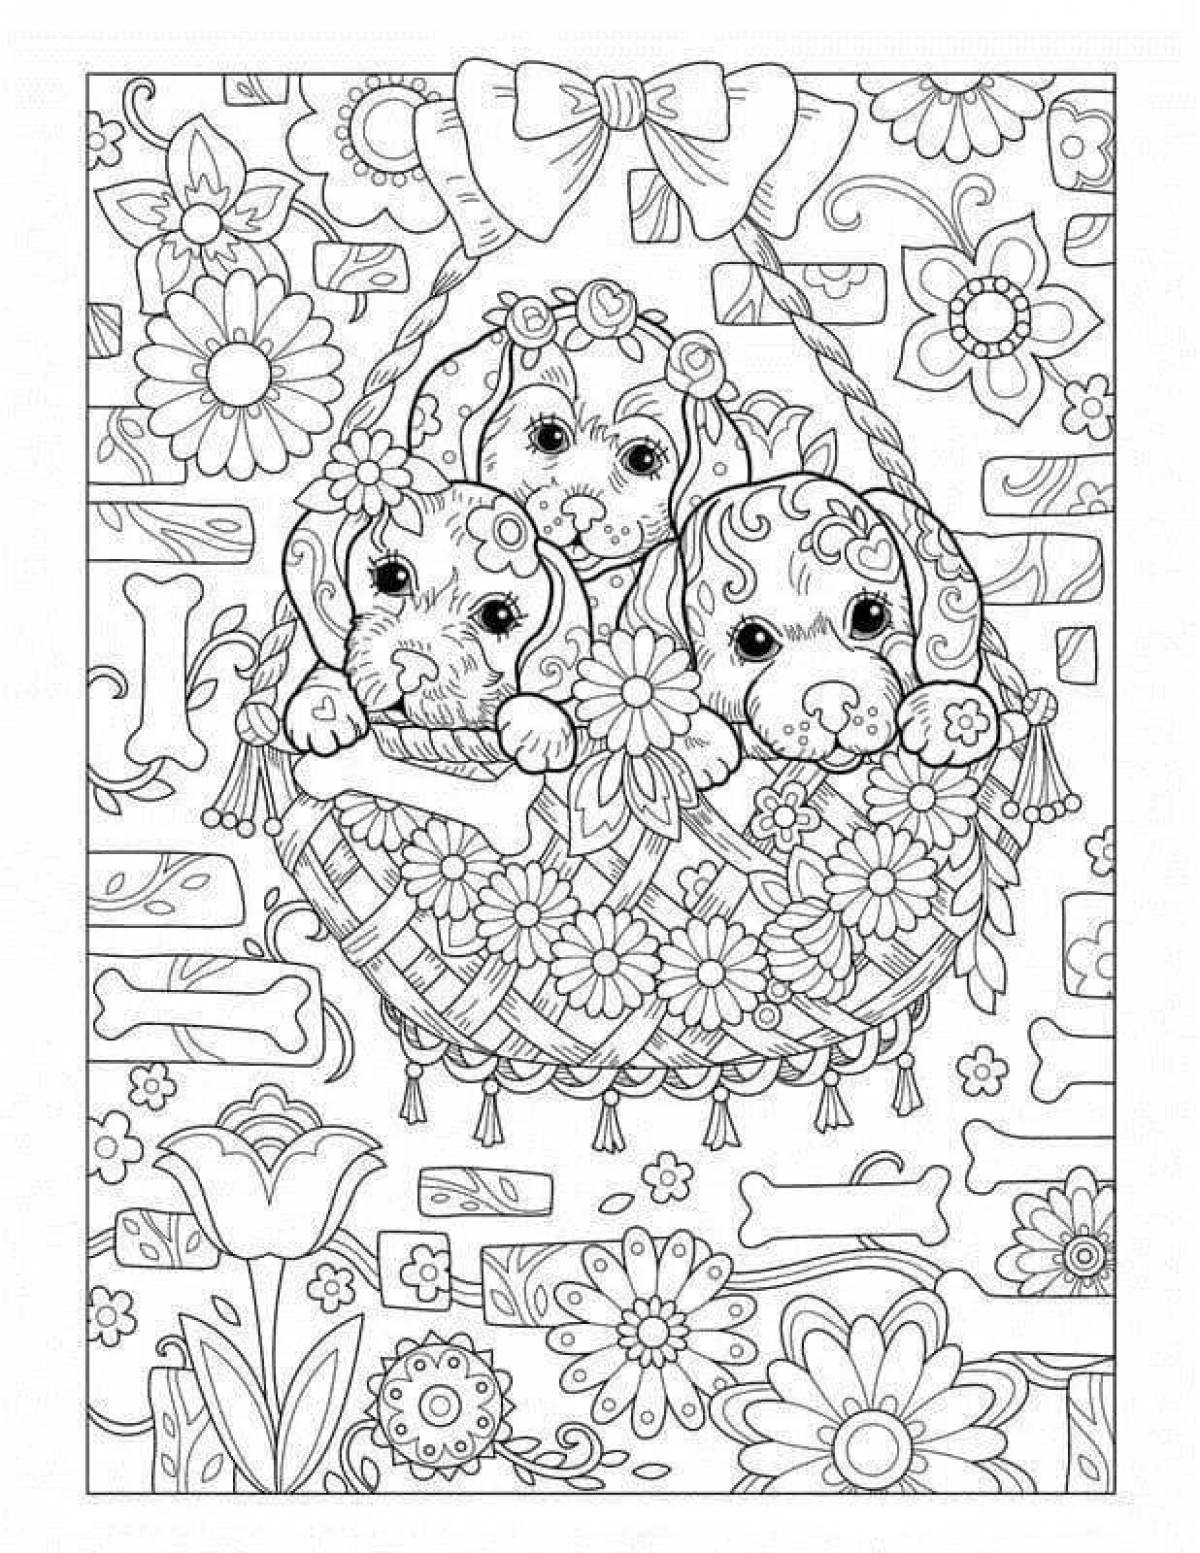 Coloring book for girls 9 years old